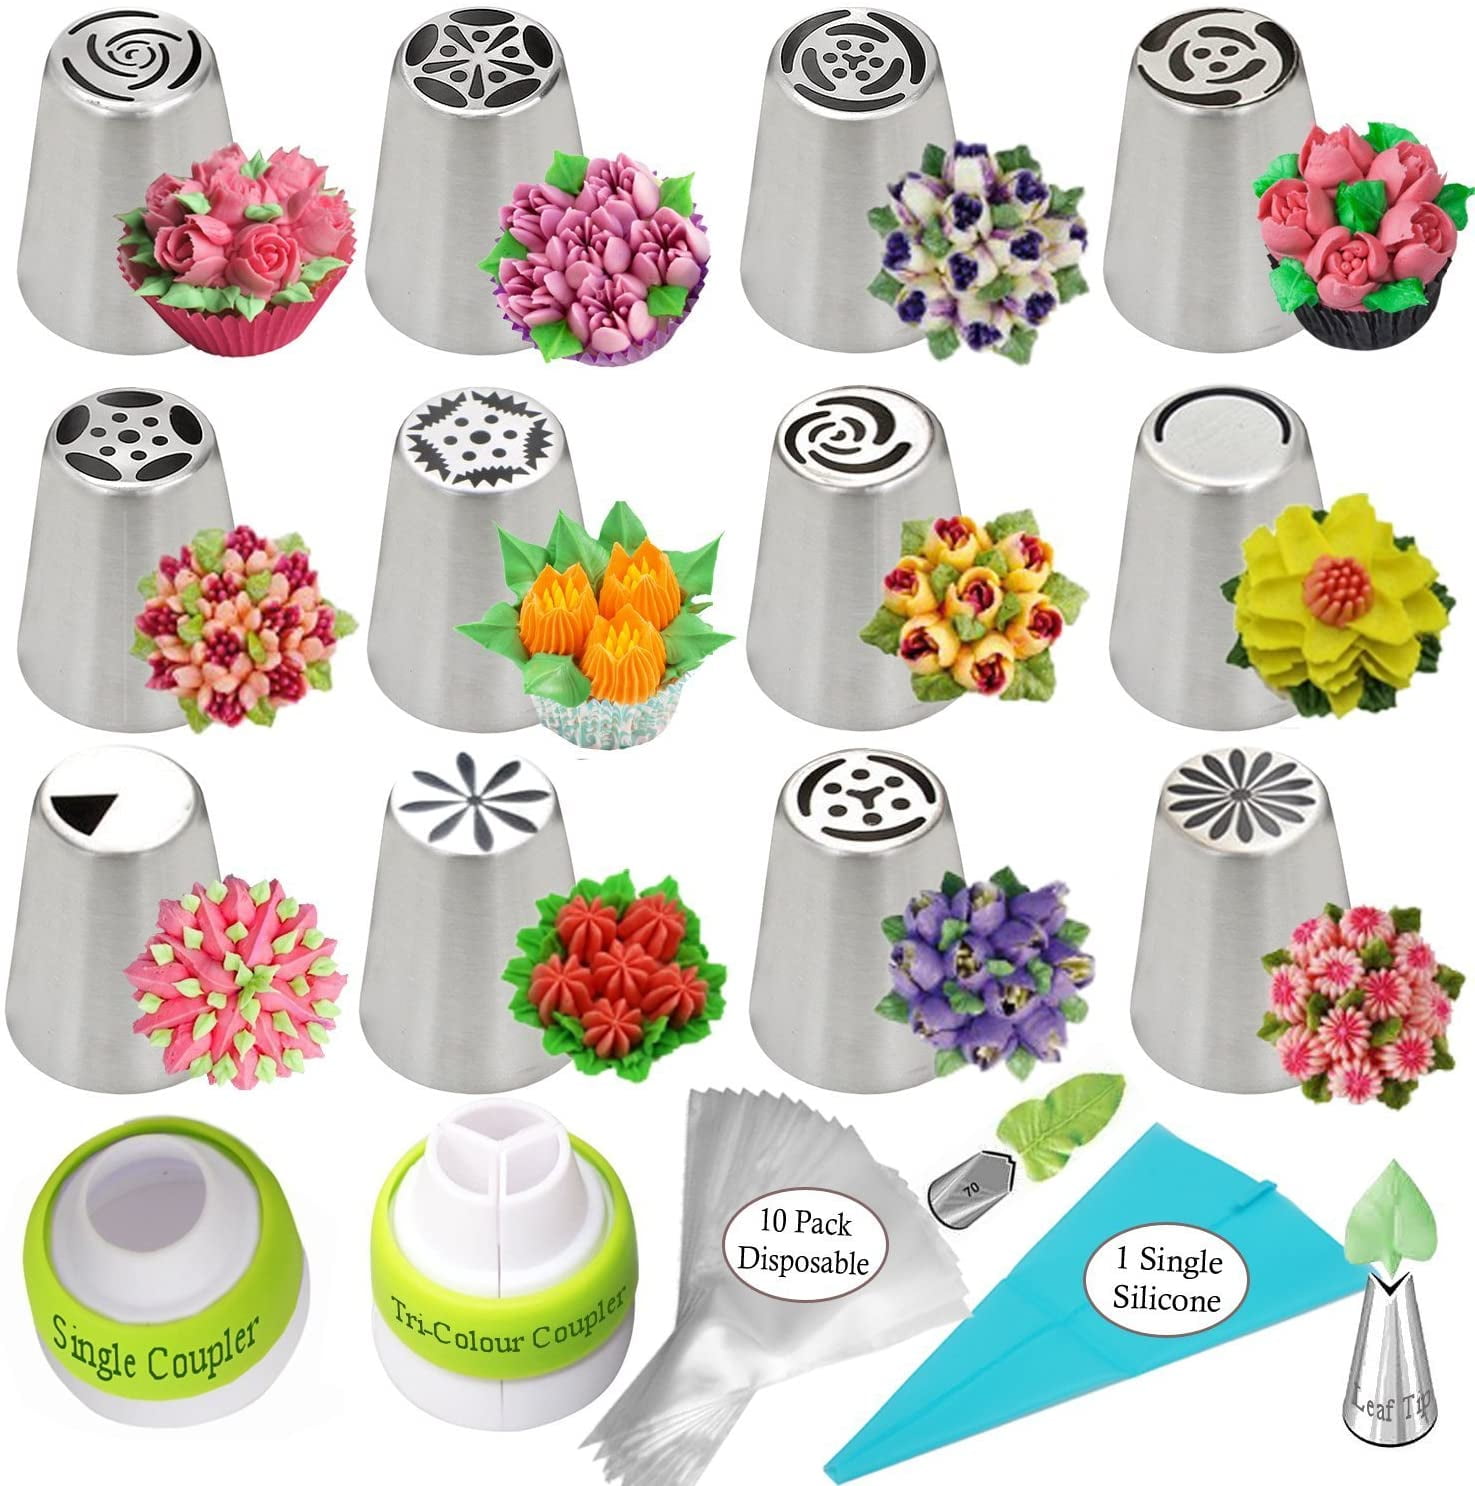 Russian Piping Tips Set Cake Decorating Supplies Kit Flower Frosting